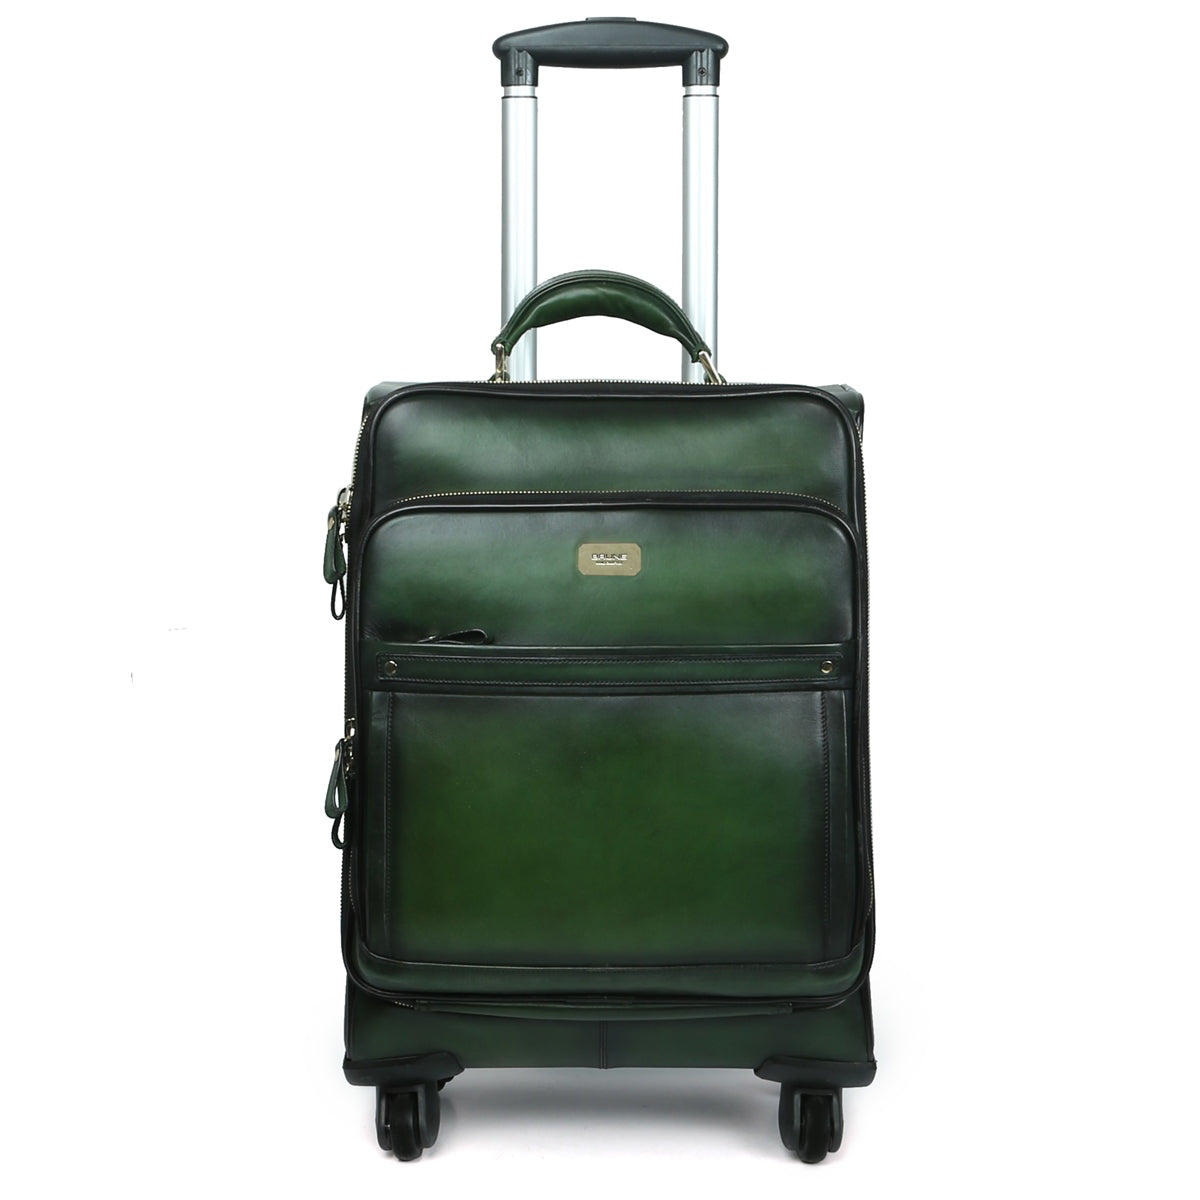 Soft Luggage Bag - Get Upto 50% Off on Soft Trolley Bags Online | Wildcraft